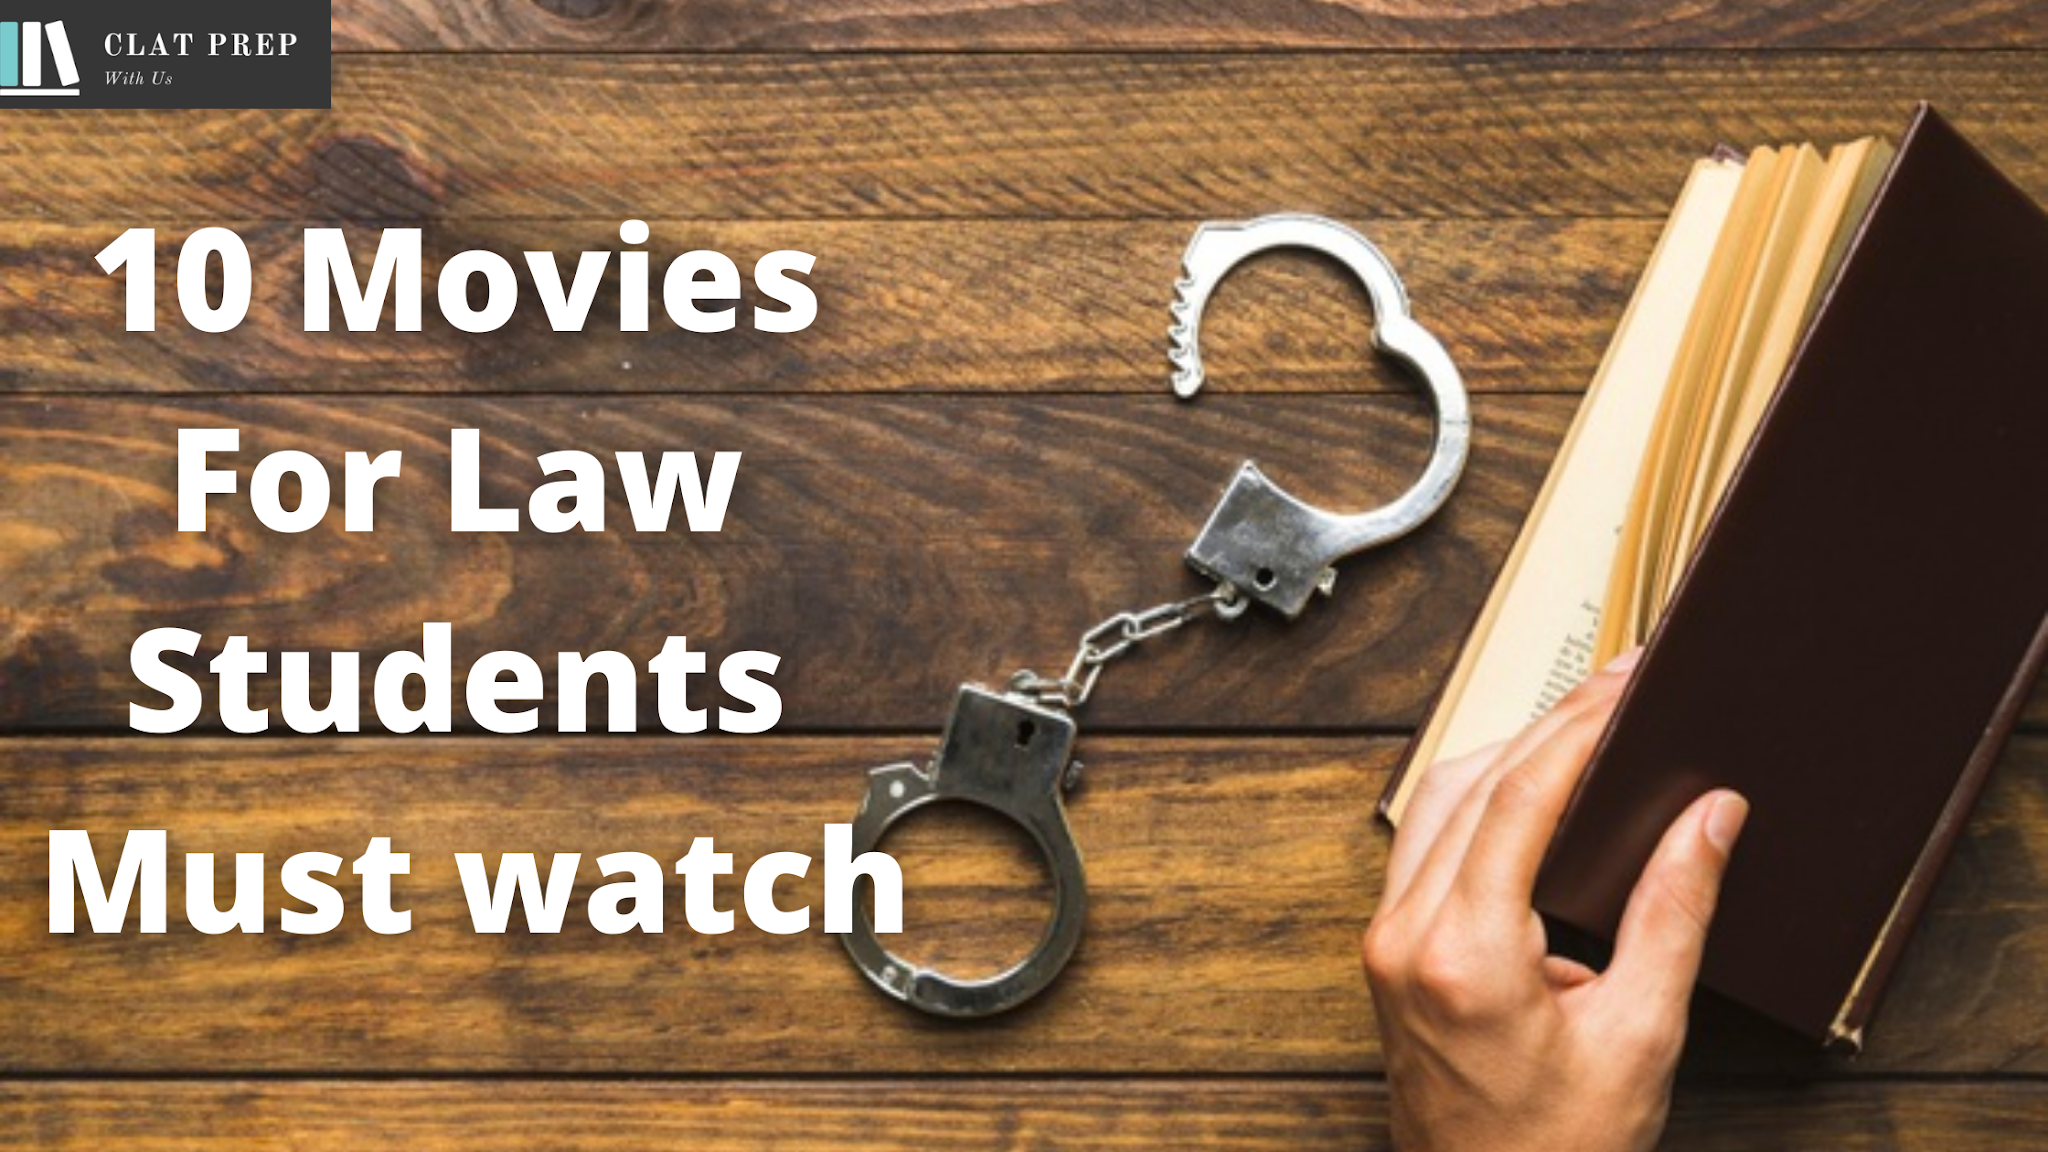 10 Movies for Law Students